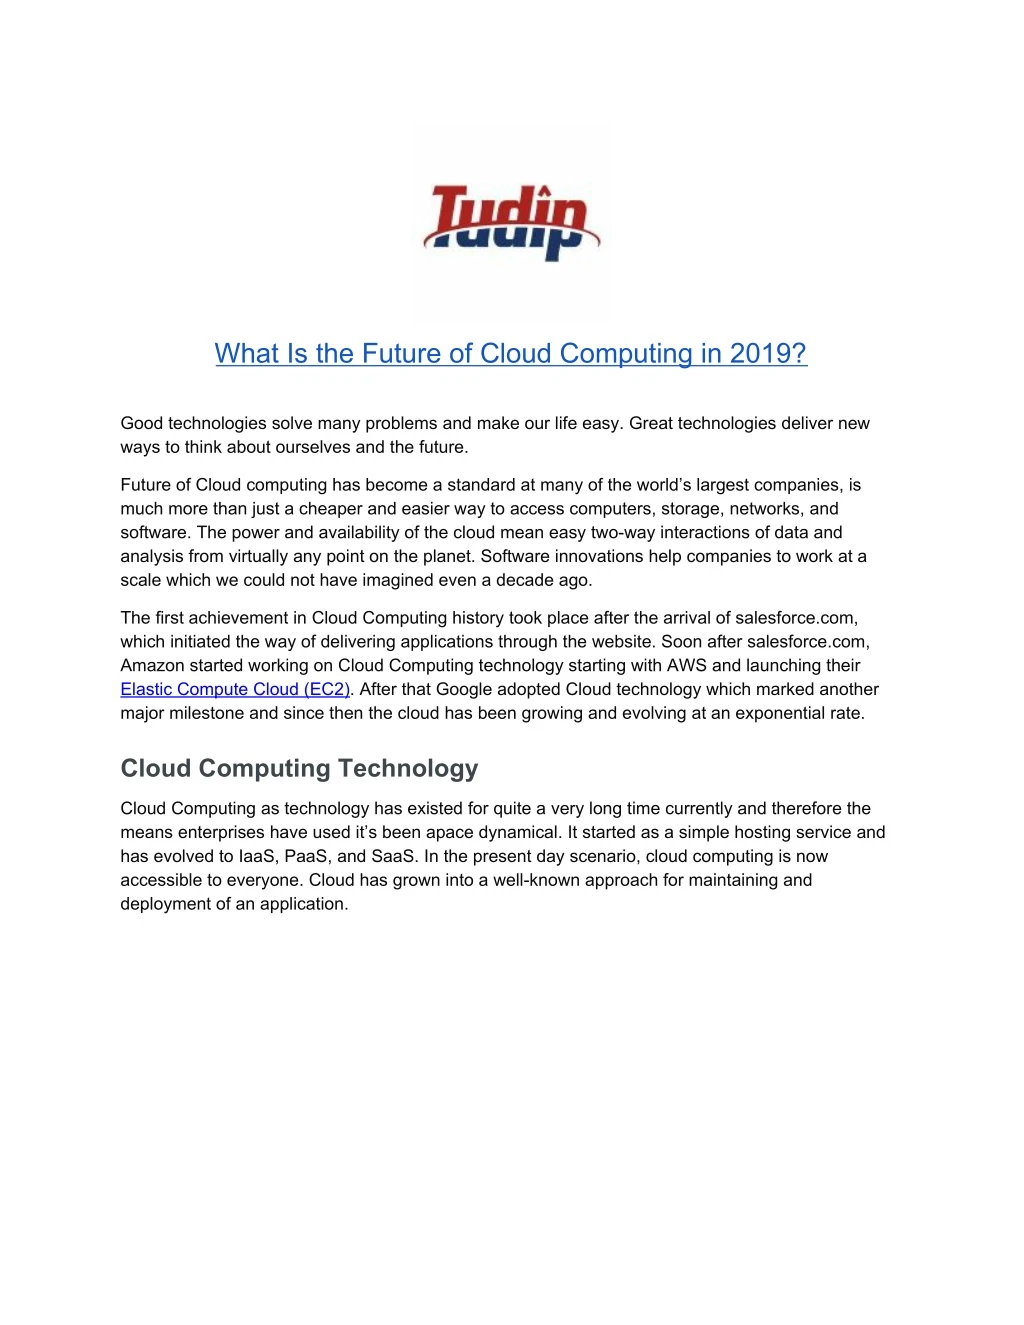 what is the future of cloud computing in 2019